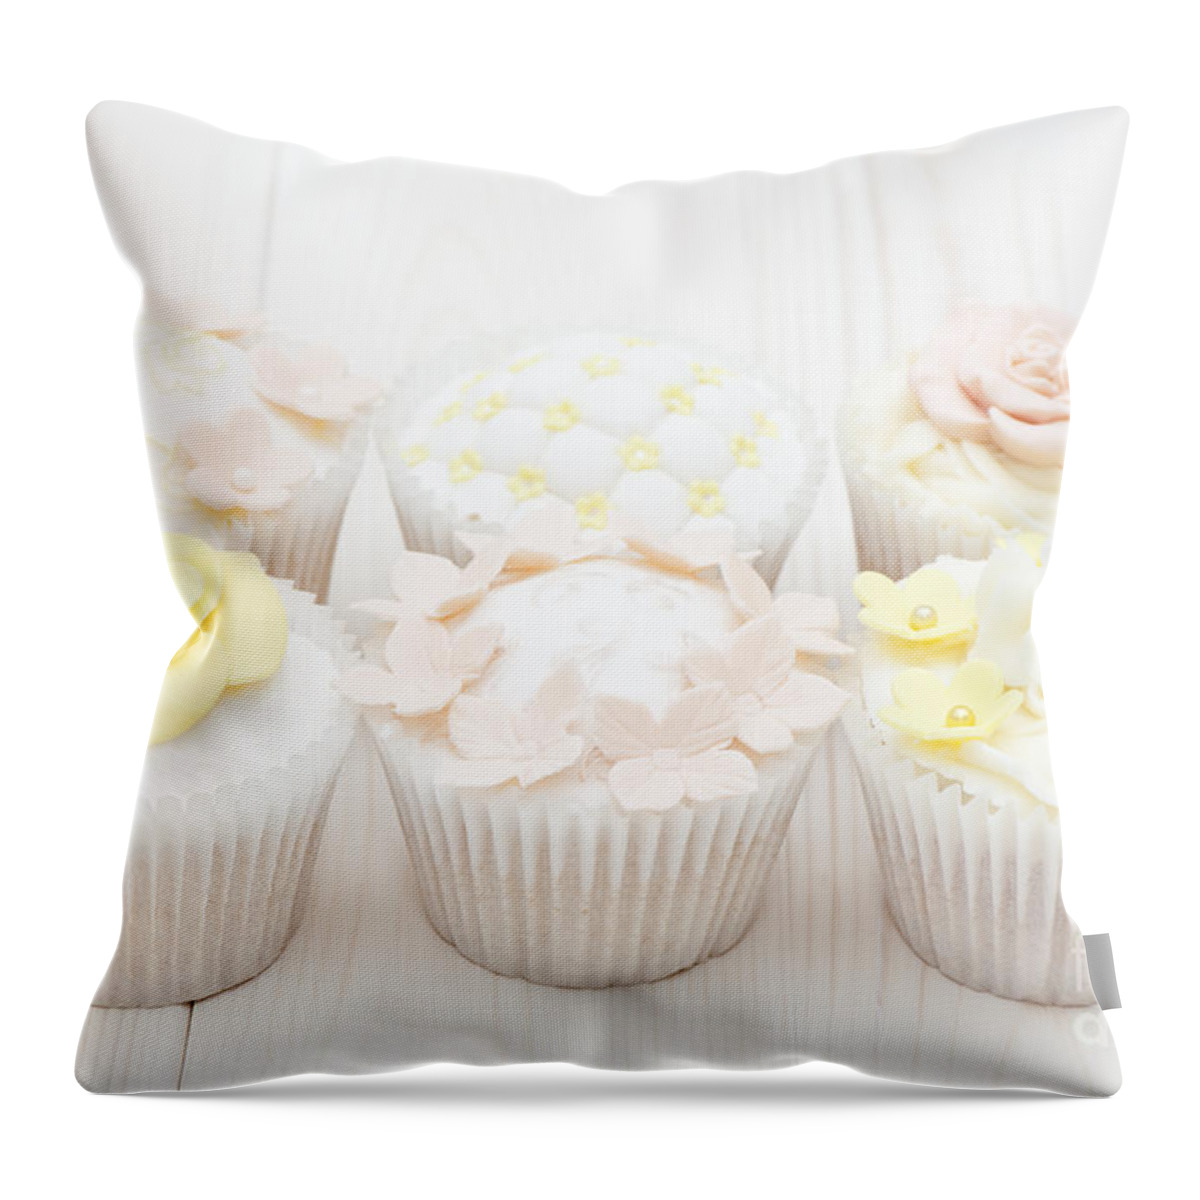 Baked Throw Pillow featuring the photograph Eat With Your Eyes by Anne Gilbert